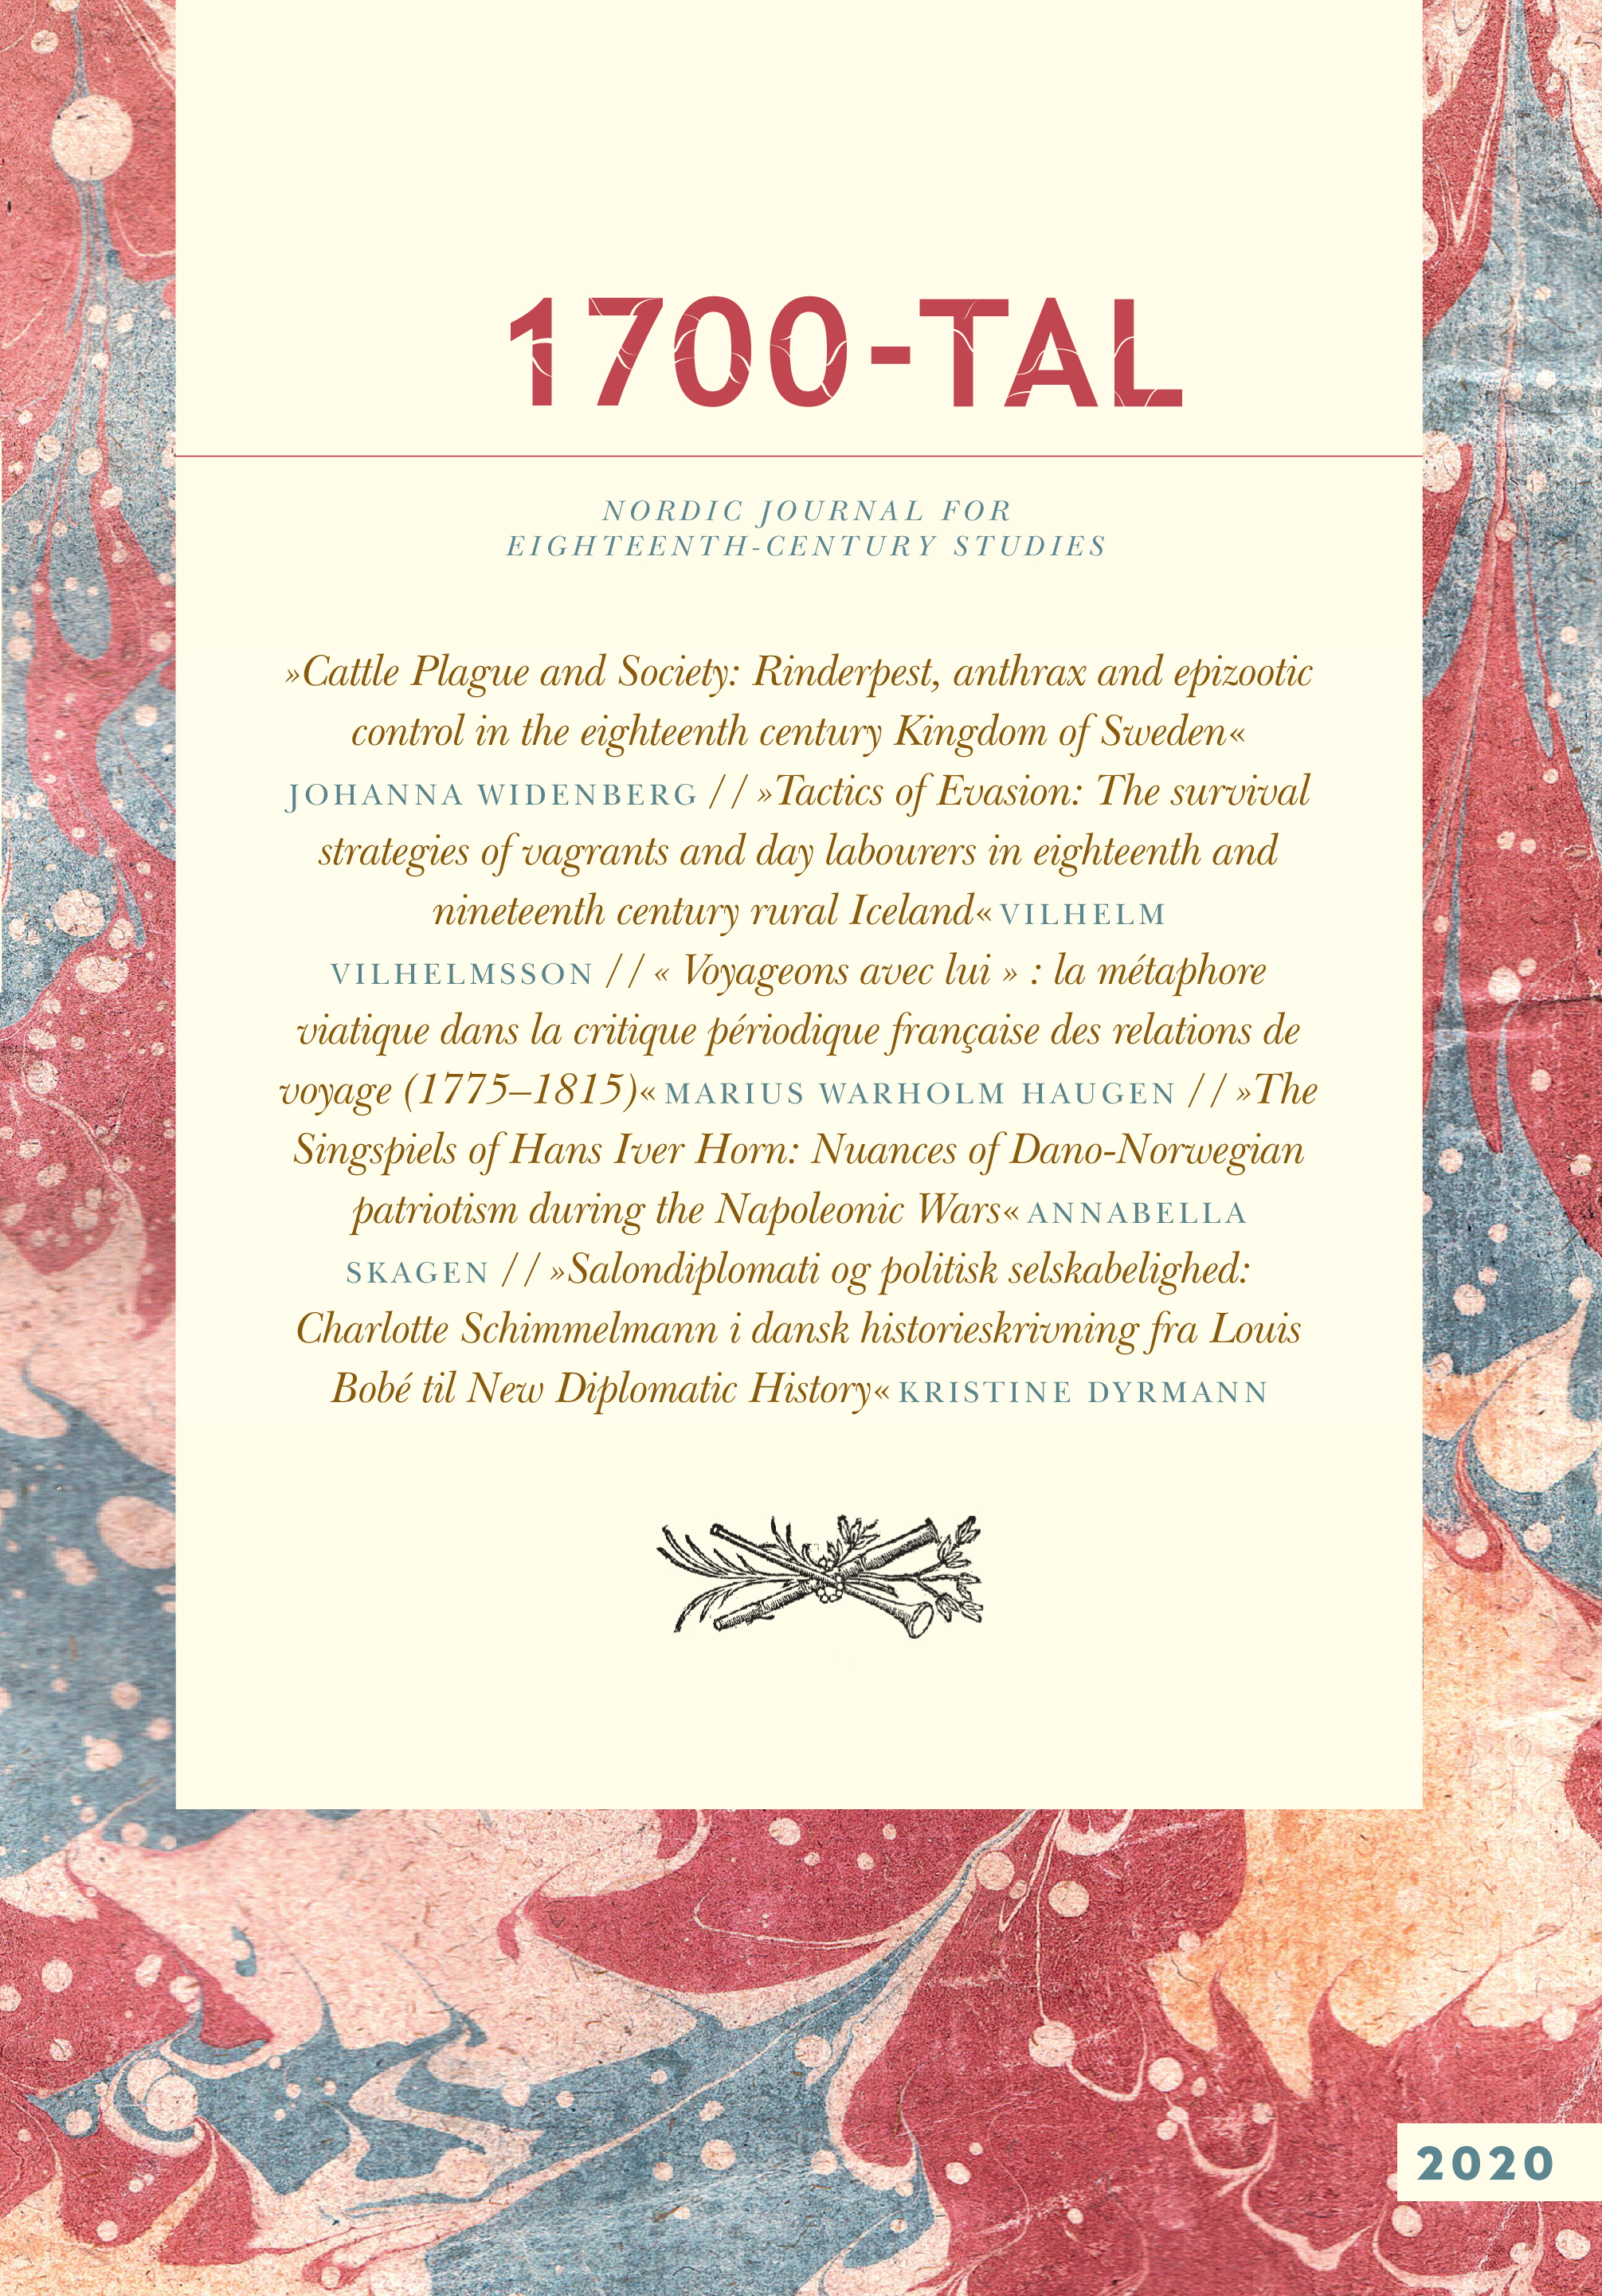 Frontcover of 1700-tal 2020.